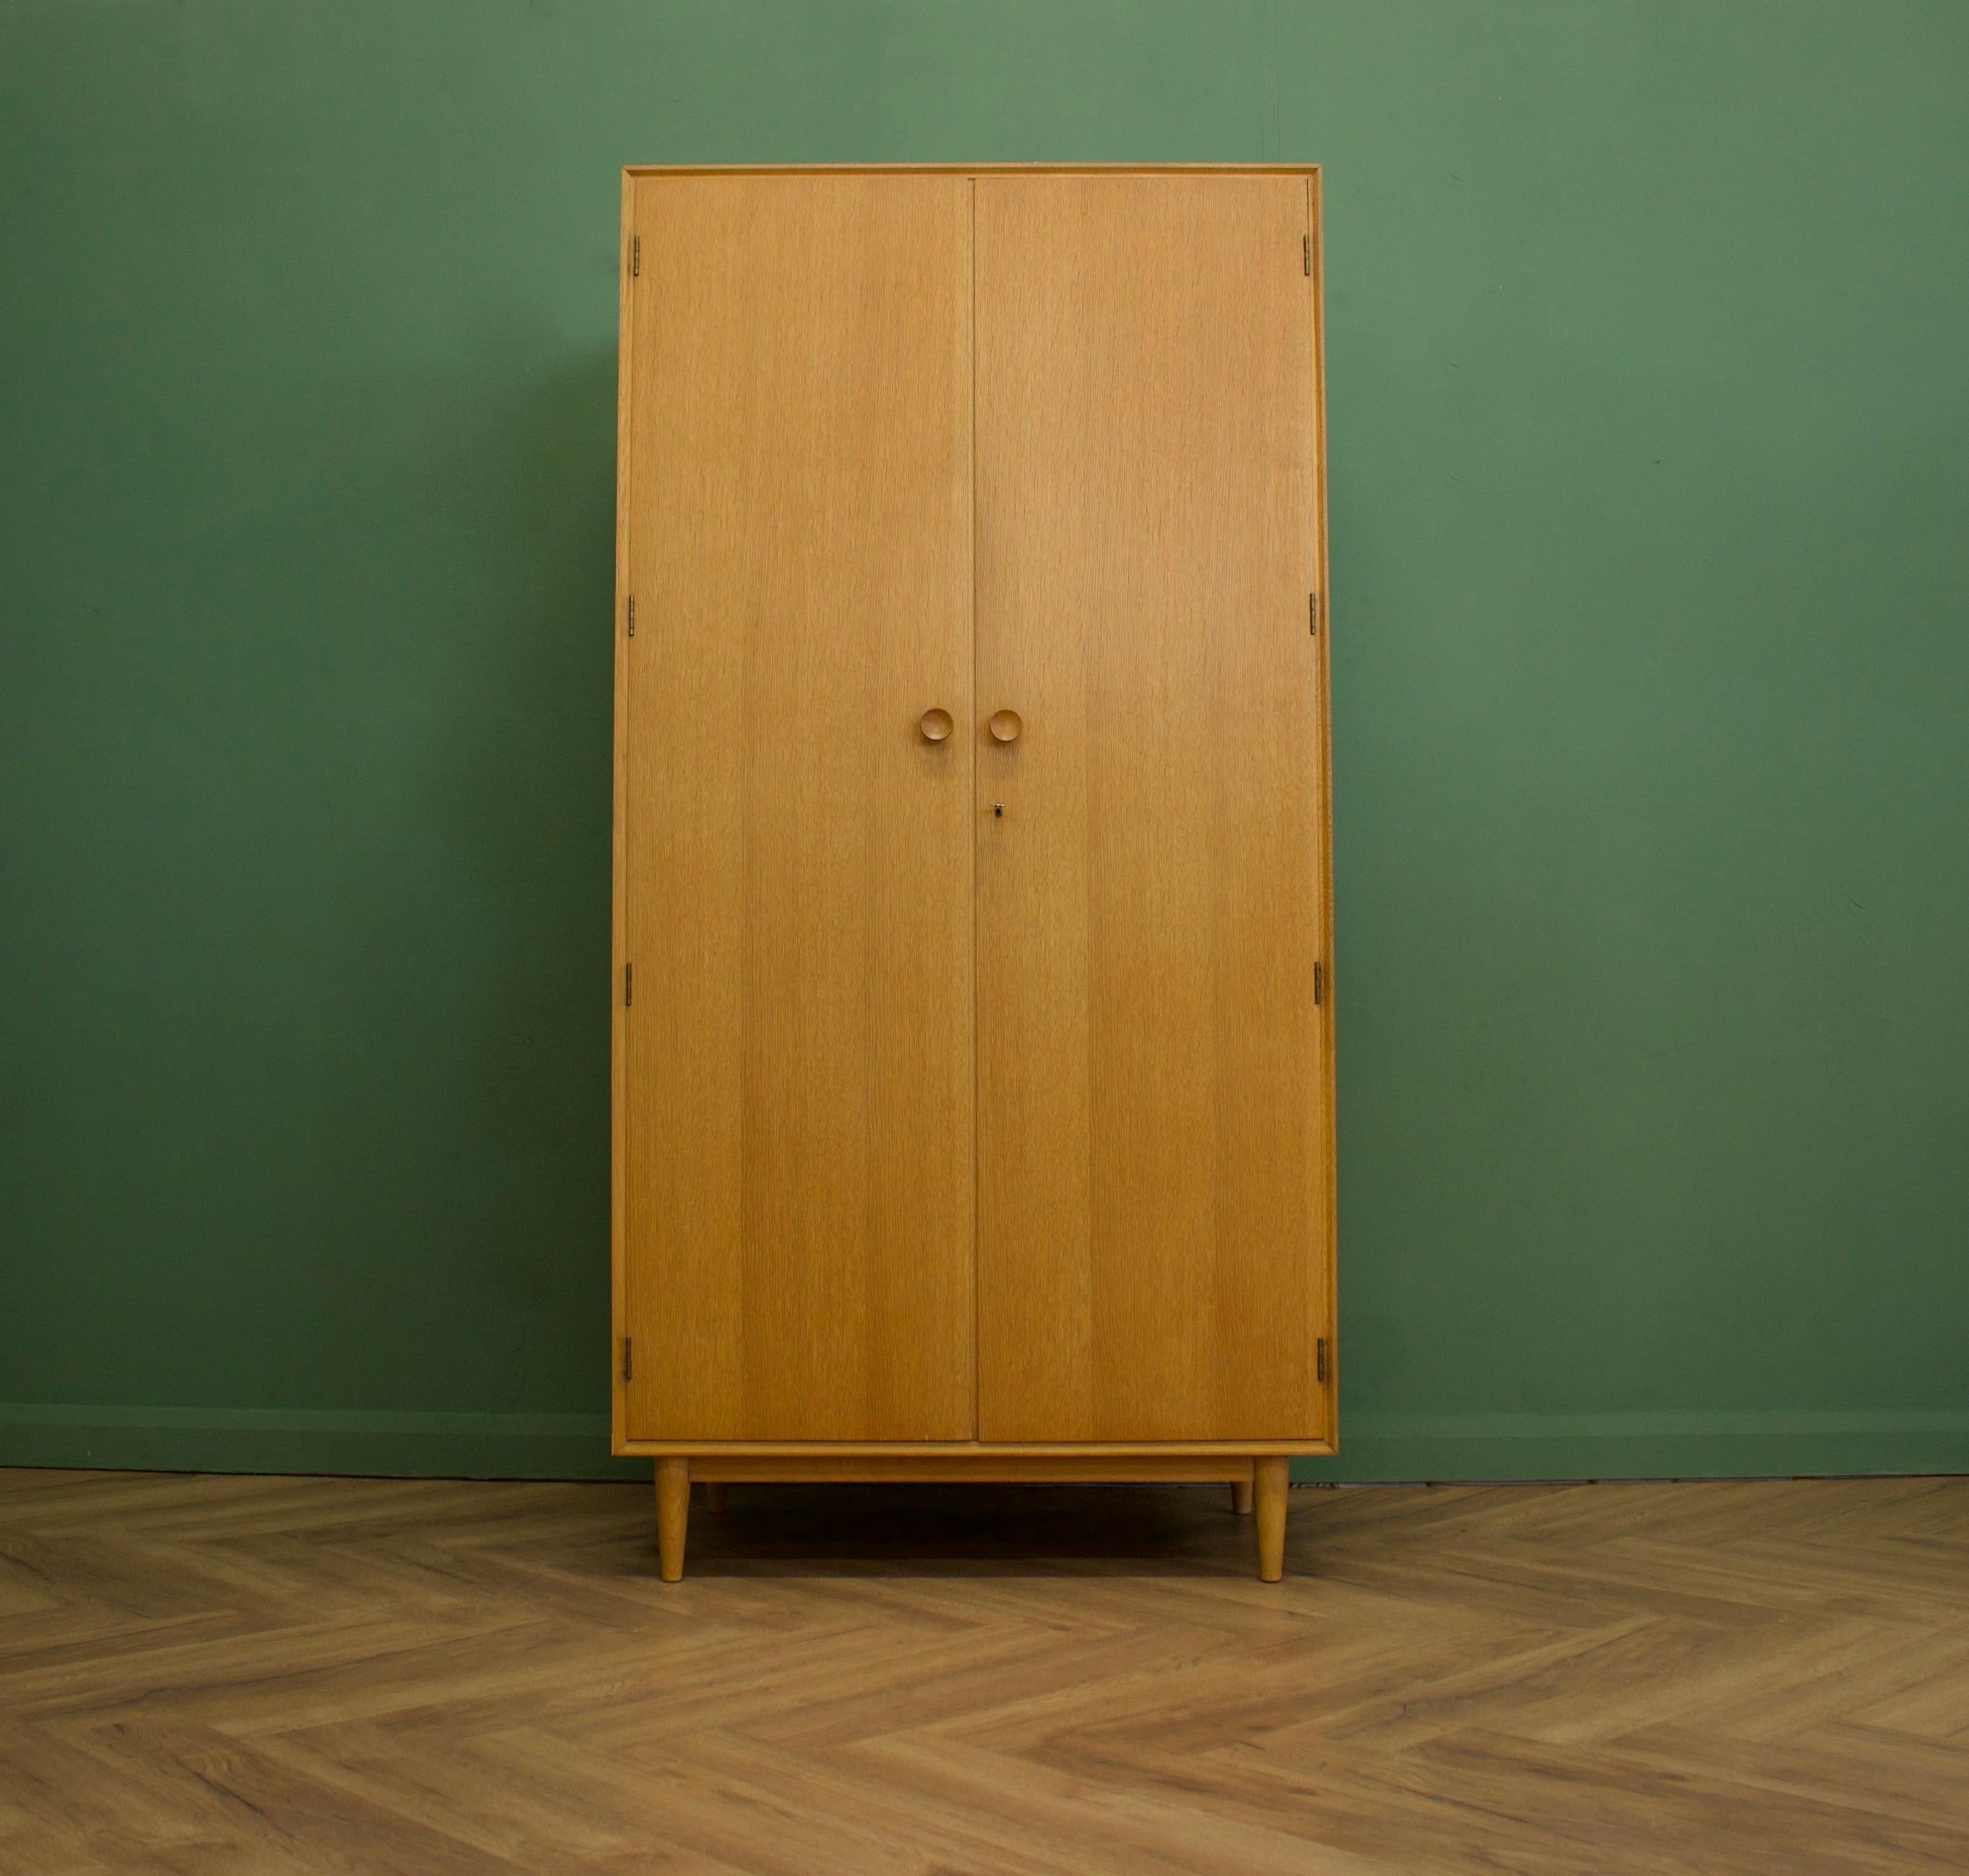 Midcentury wardrobe
Manufactured in the UK by Meredew
Made from oak and oak veneer.

Featuring solid oak handles two rails and a shelf.